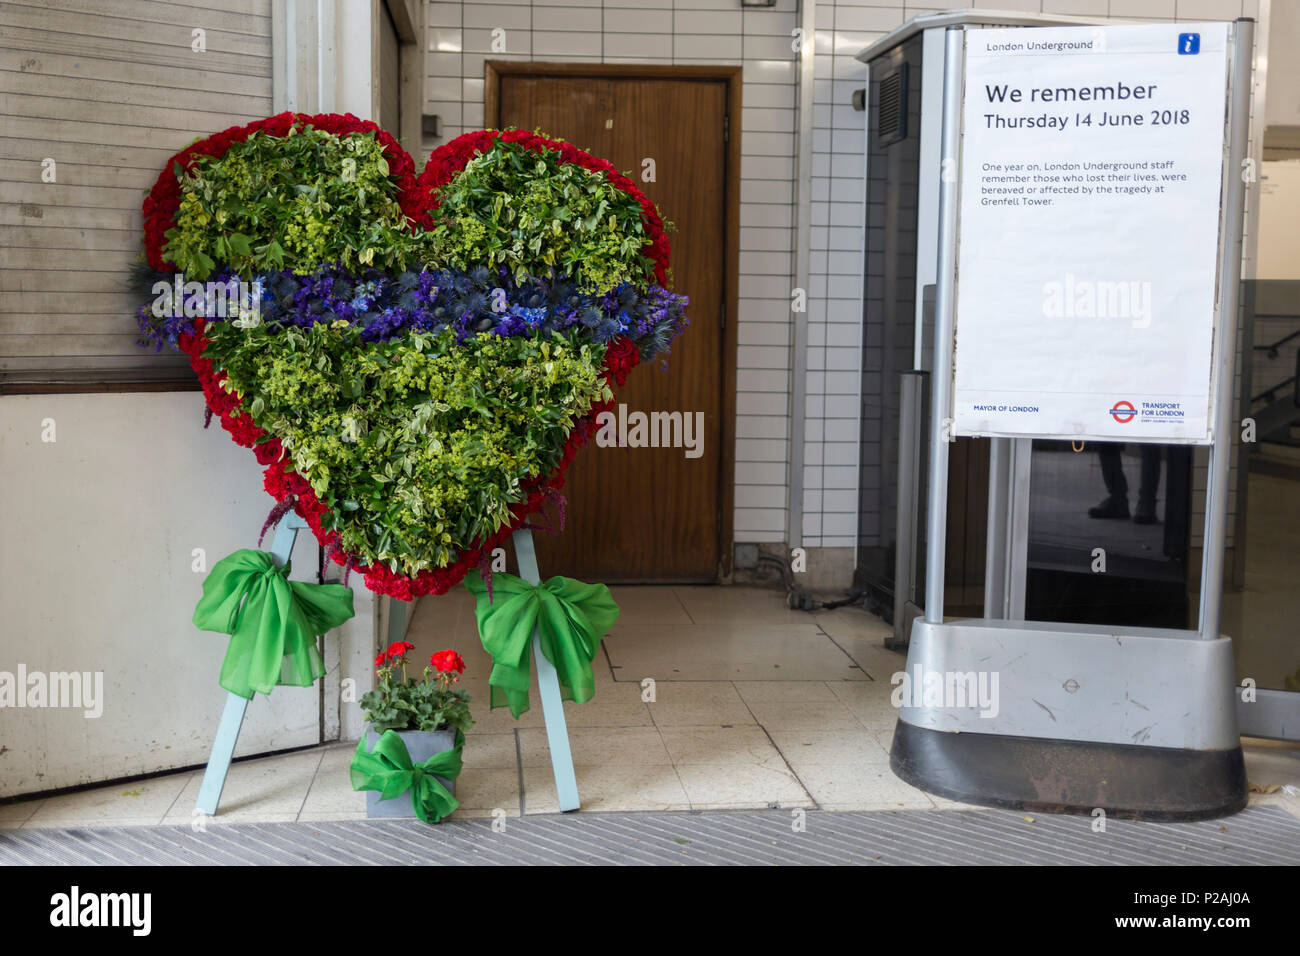 London, UK. 14th Jun, 2018.  A memorial wreath at the entrance of Latimer Road tube station on the first anniversary of the Grenfell tower fire. 72 people died when the tower block in the borough of Kensington & Chelsea were killed in what has been called the largest fire since WW2. The 24-storey Grenfell Tower block of public housing flats in North Kensington, West London, United Kingdom. It caused 72 deaths, out of the 293 people in the building, including 2 who escaped and died in hospital. Over 70 were injured and left traumatised. Credit: RichardBaker/Alamy Live News Stock Photo